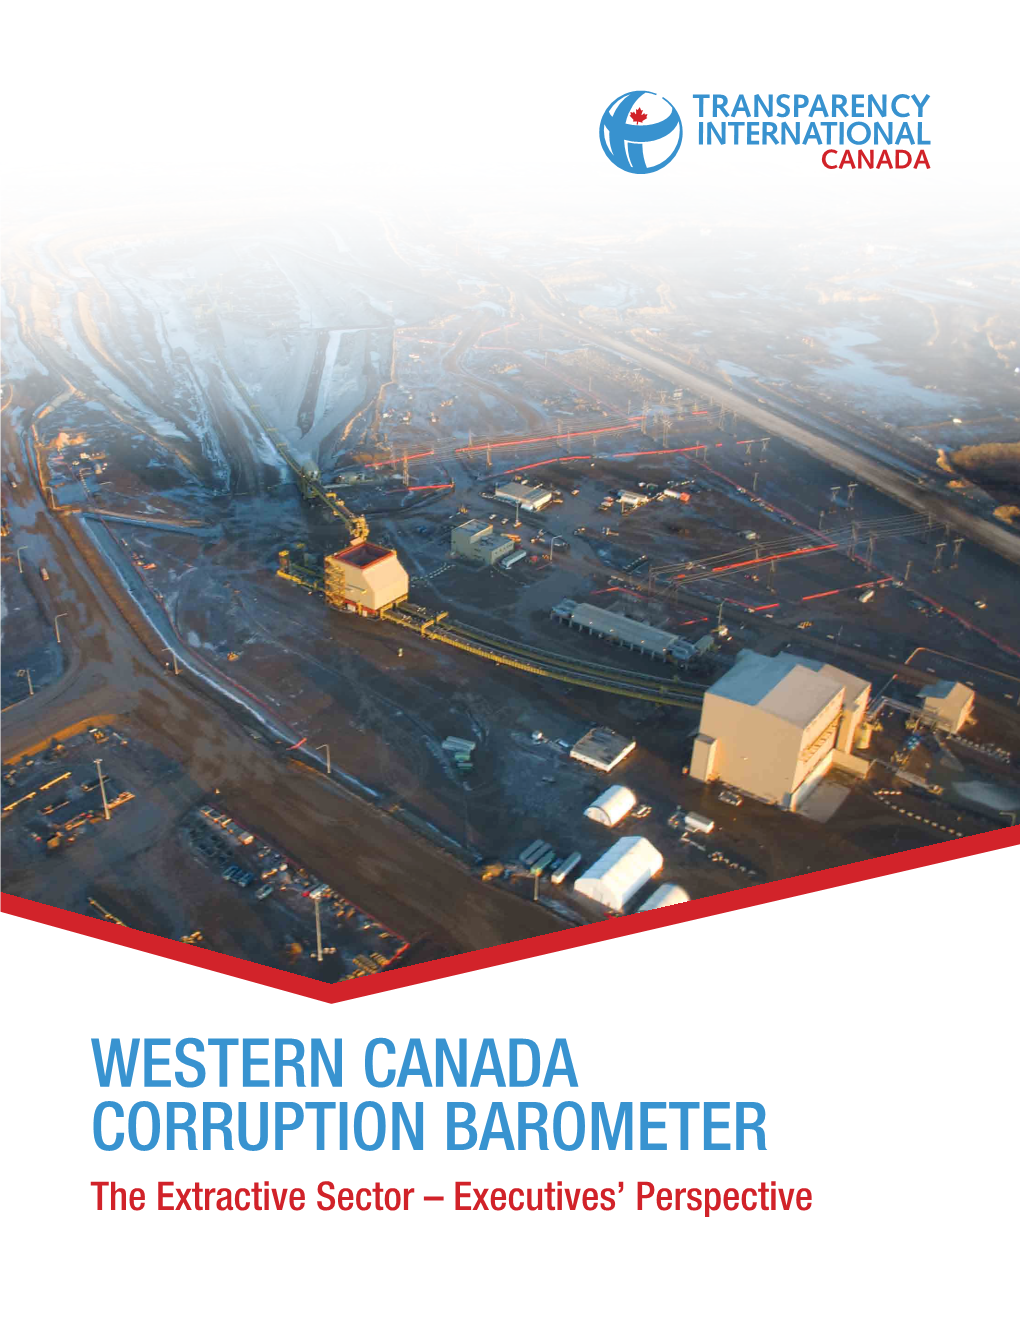 Western Canada Corruption Barometer the Extractive Sector – Executives’ Perspective © 2018 Transparency International Canada